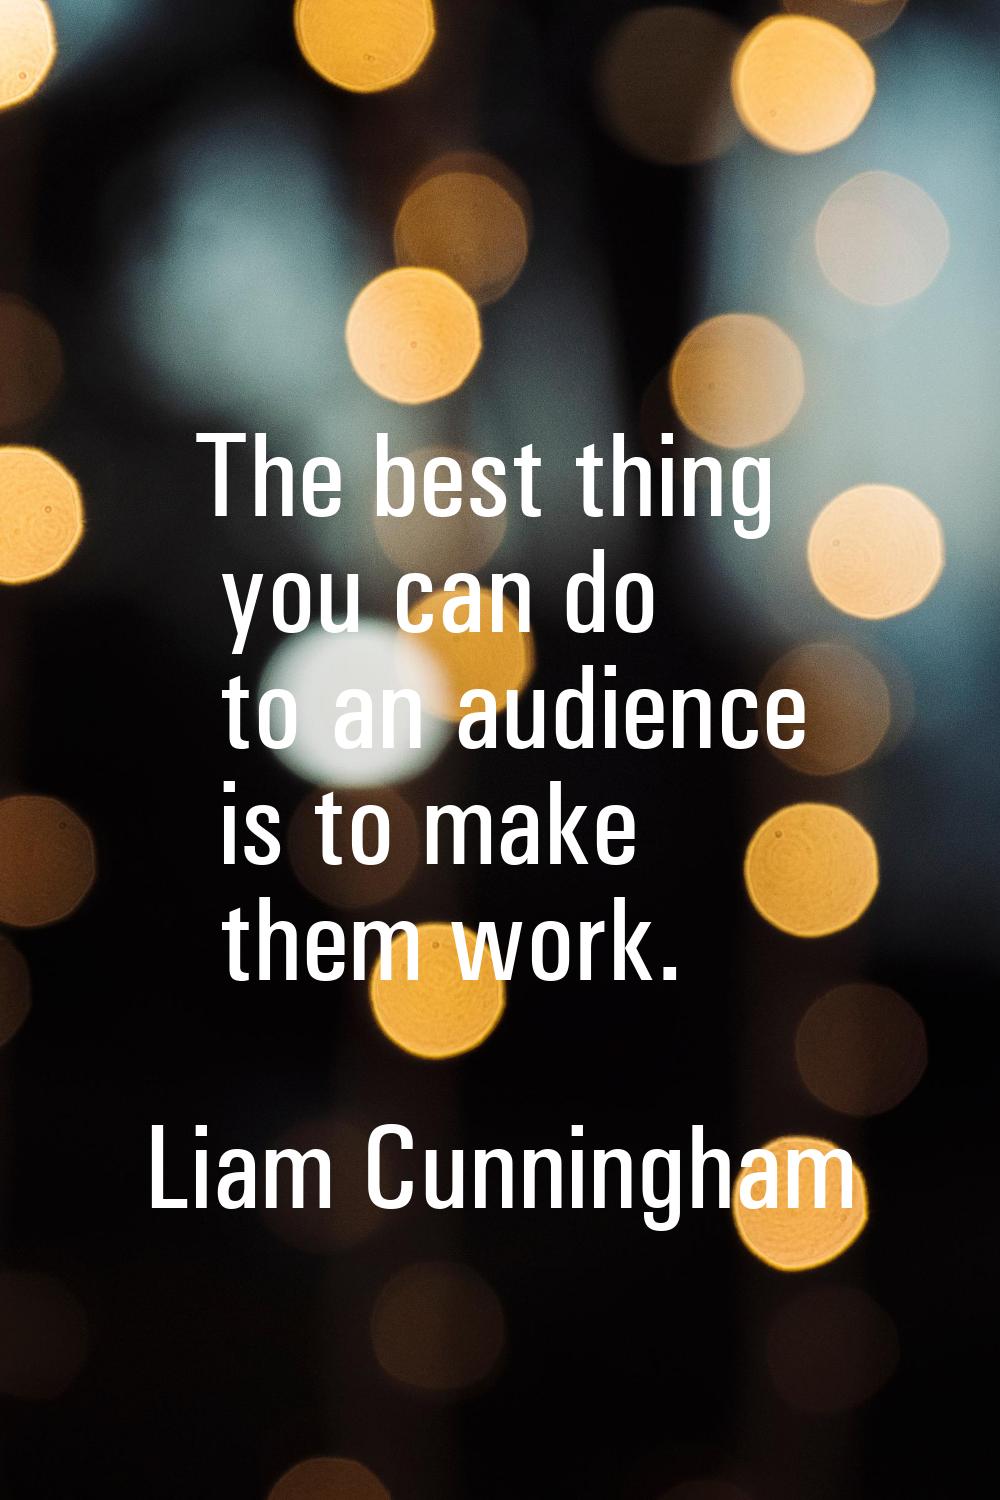 The best thing you can do to an audience is to make them work.